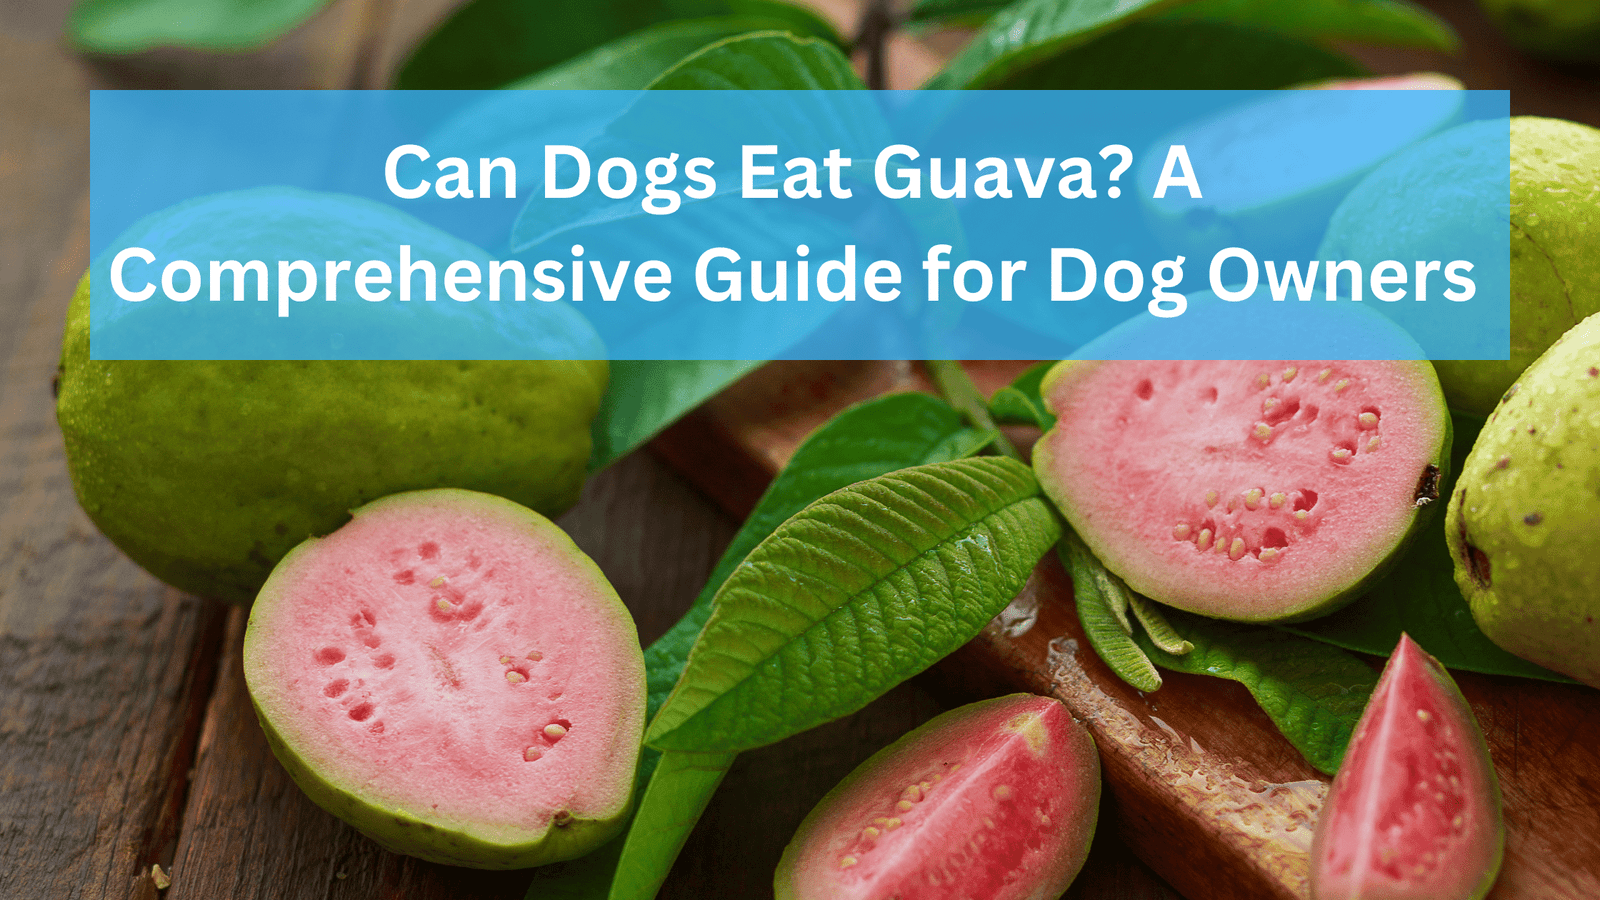 Can Dogs Eat Guava? A Comprehensive Guide for Dog Owners